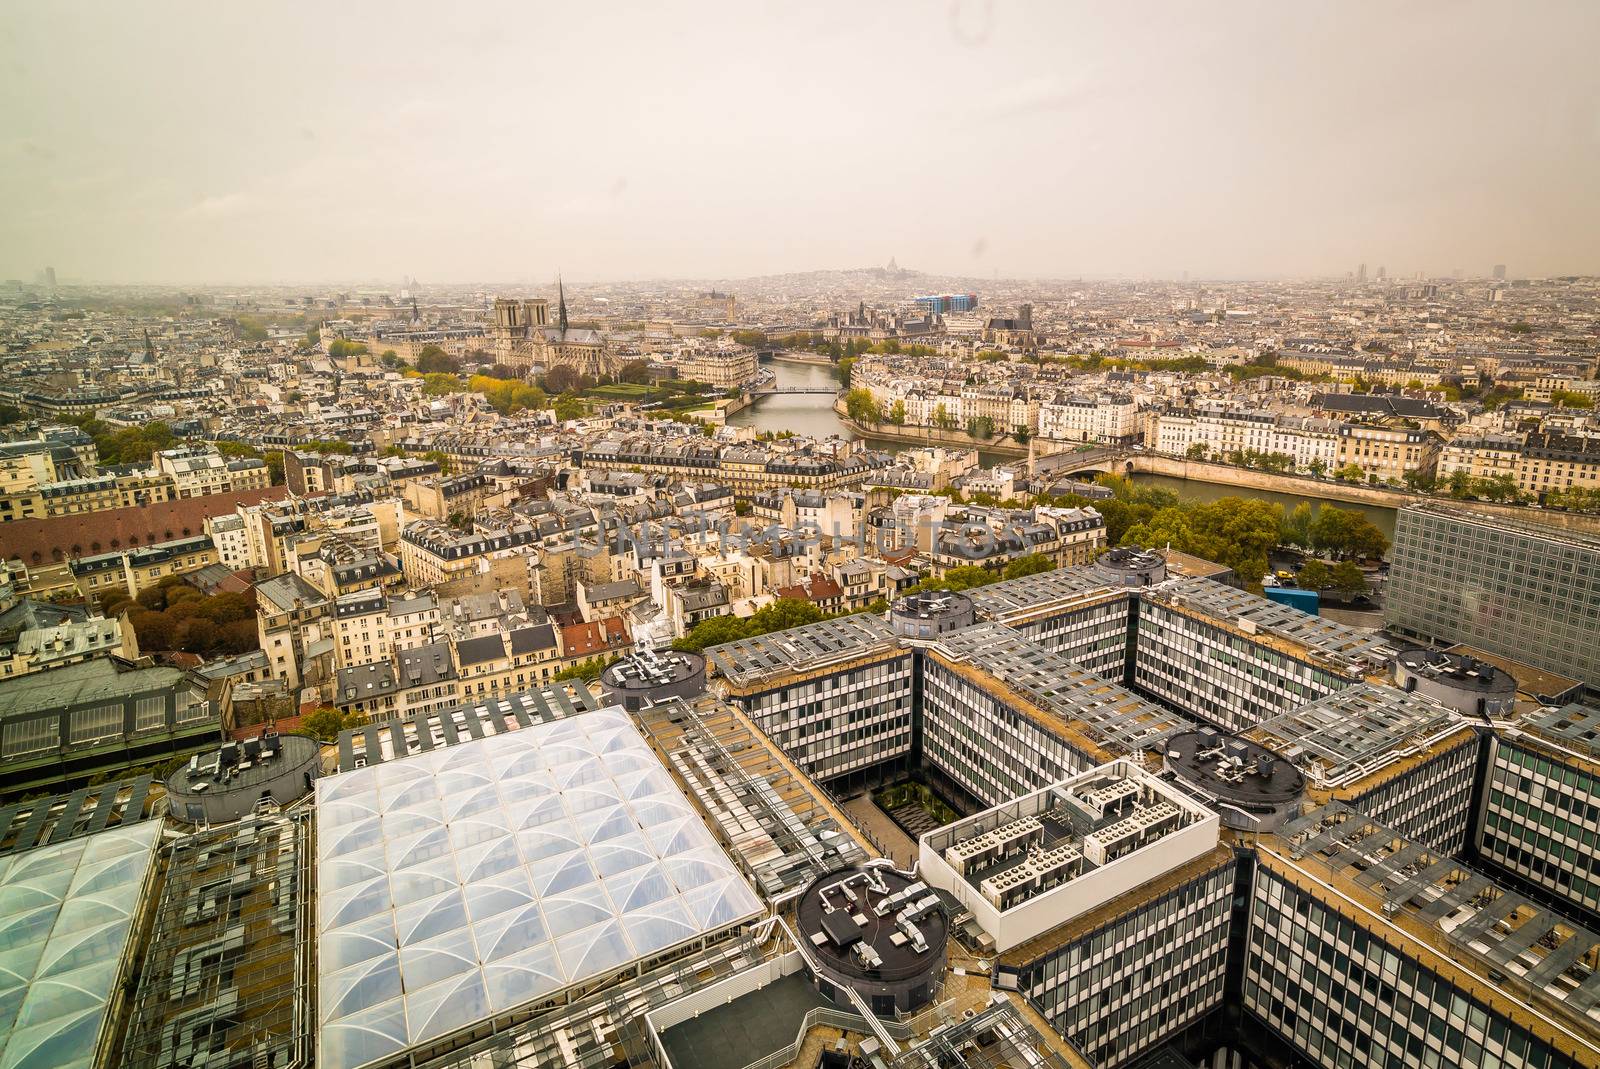 University of Paris Jussieu with Paris in the background